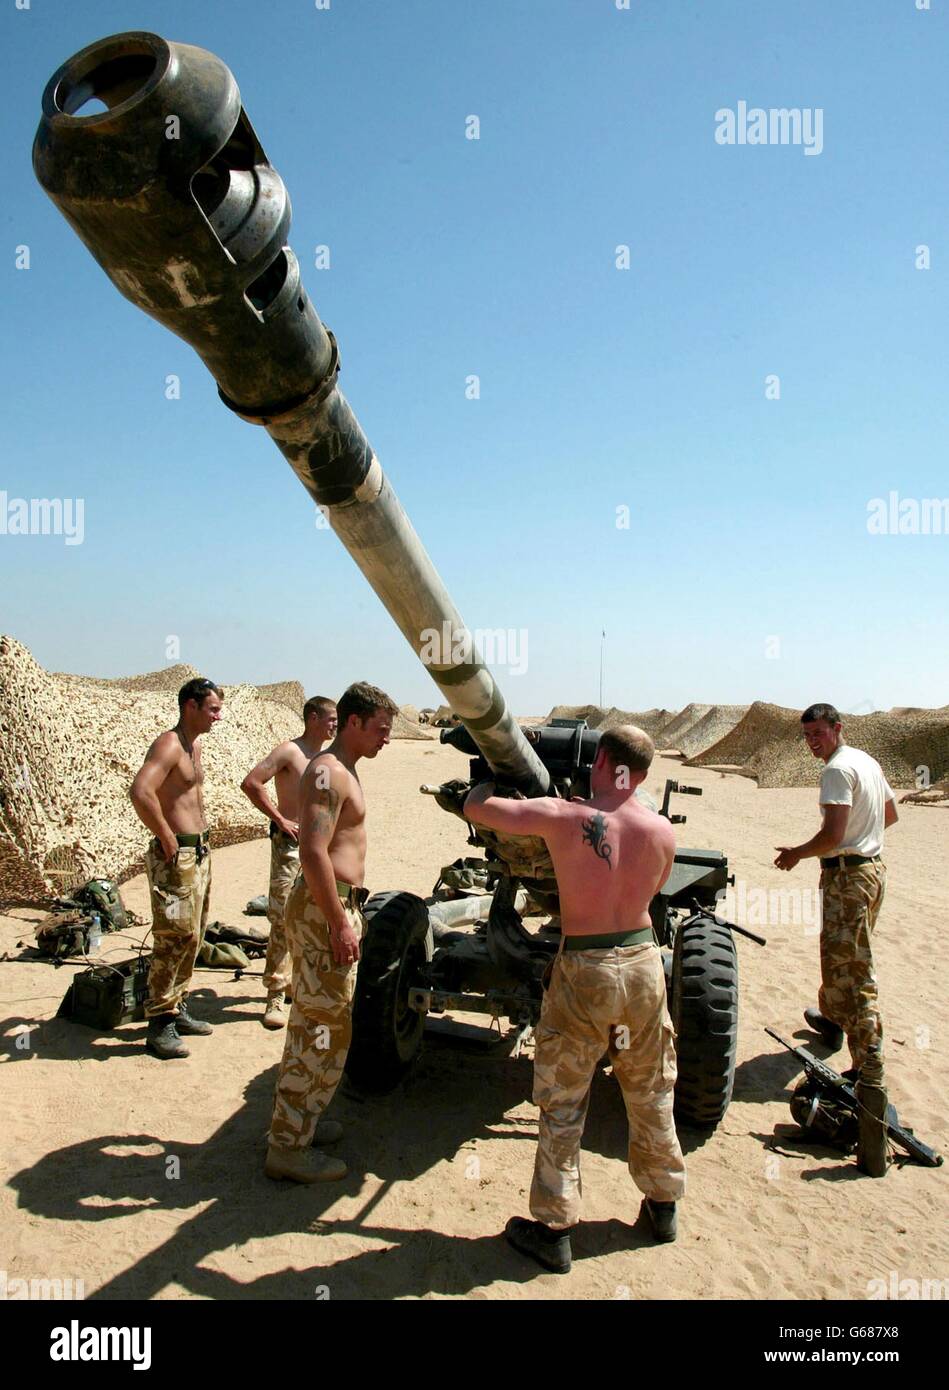 British Soldiers from 29 Commando Regiment Royal Artillery carry out maintenance on their 105mm light gun in the Kuwait desert near to the Iraq border. As military forces in the Gulf gear up for war, *..U.S. President Bush will meet the British and Spanish Prime Ministers on Sunday amid diplomatic deadlock at the United Nations over U.S.-led plans to disarm Iraq. Stock Photo